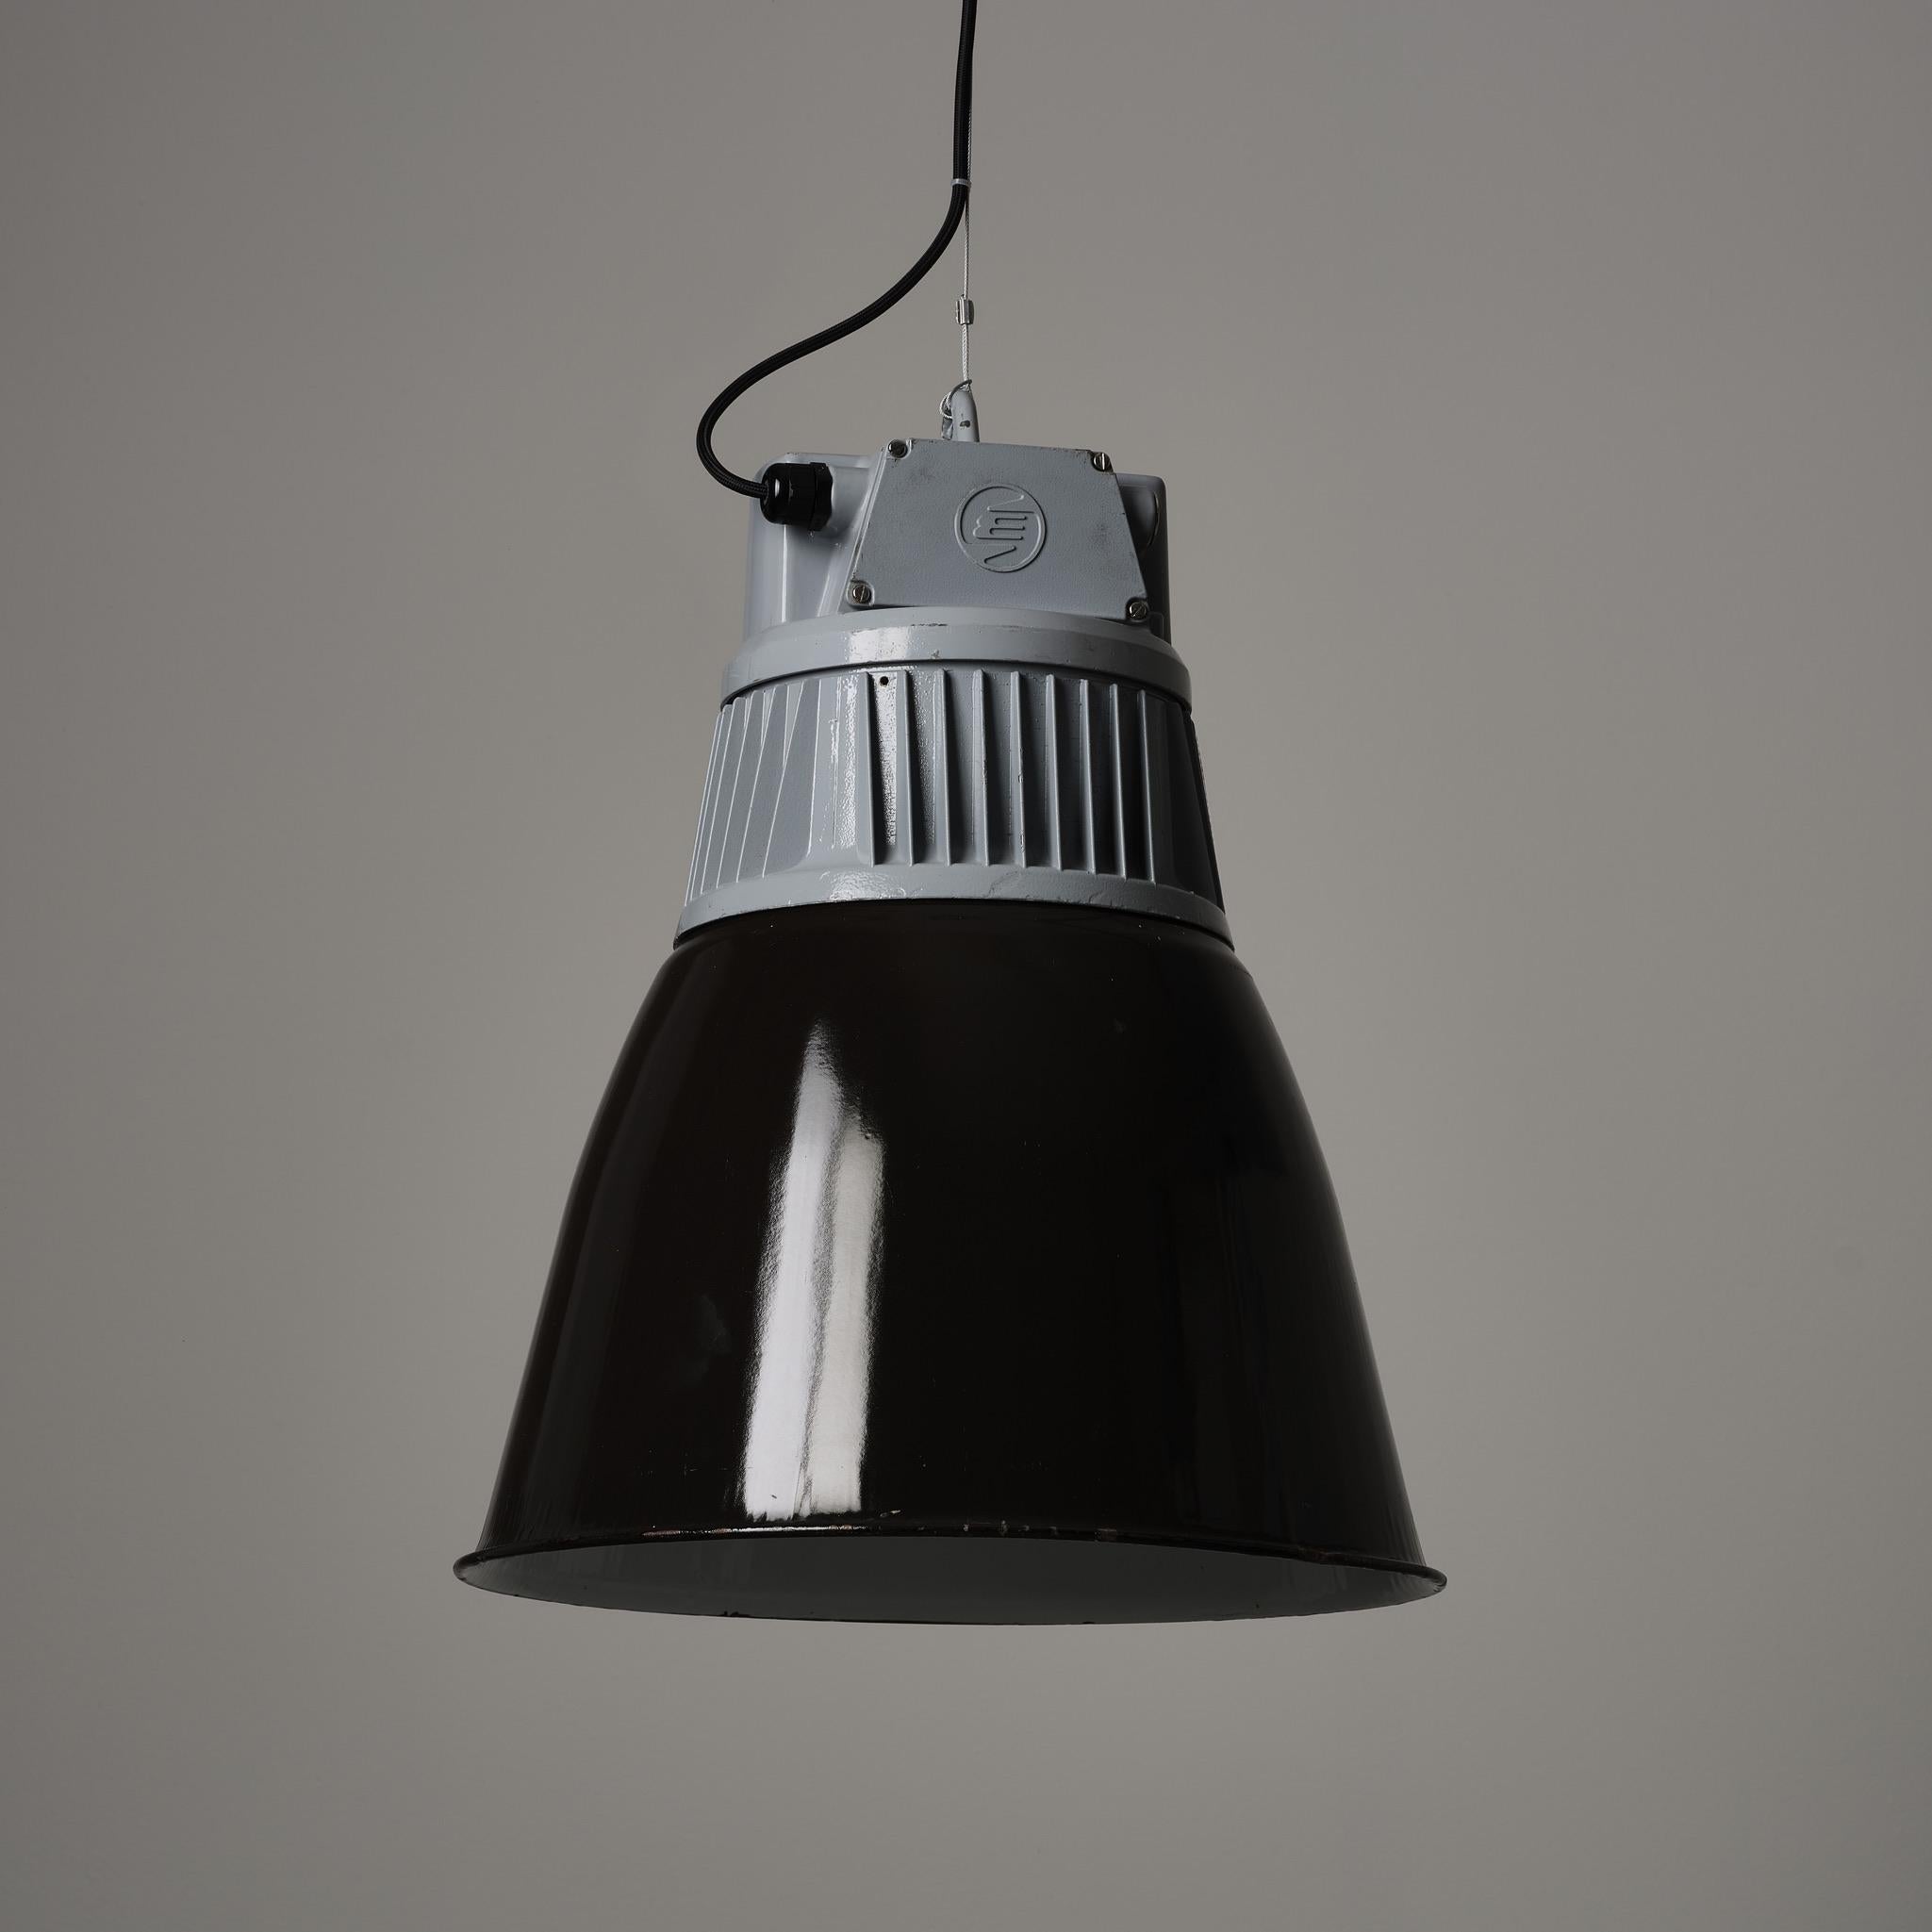 Stylish vintage industrial pendant lights reclaimed from communist-era factories in the Czech Republic. An Eastern Bloc design classic. Original black/grey enamel.

Cleaned and re-wired to the usual Trainspotters standards but otherwise supplied